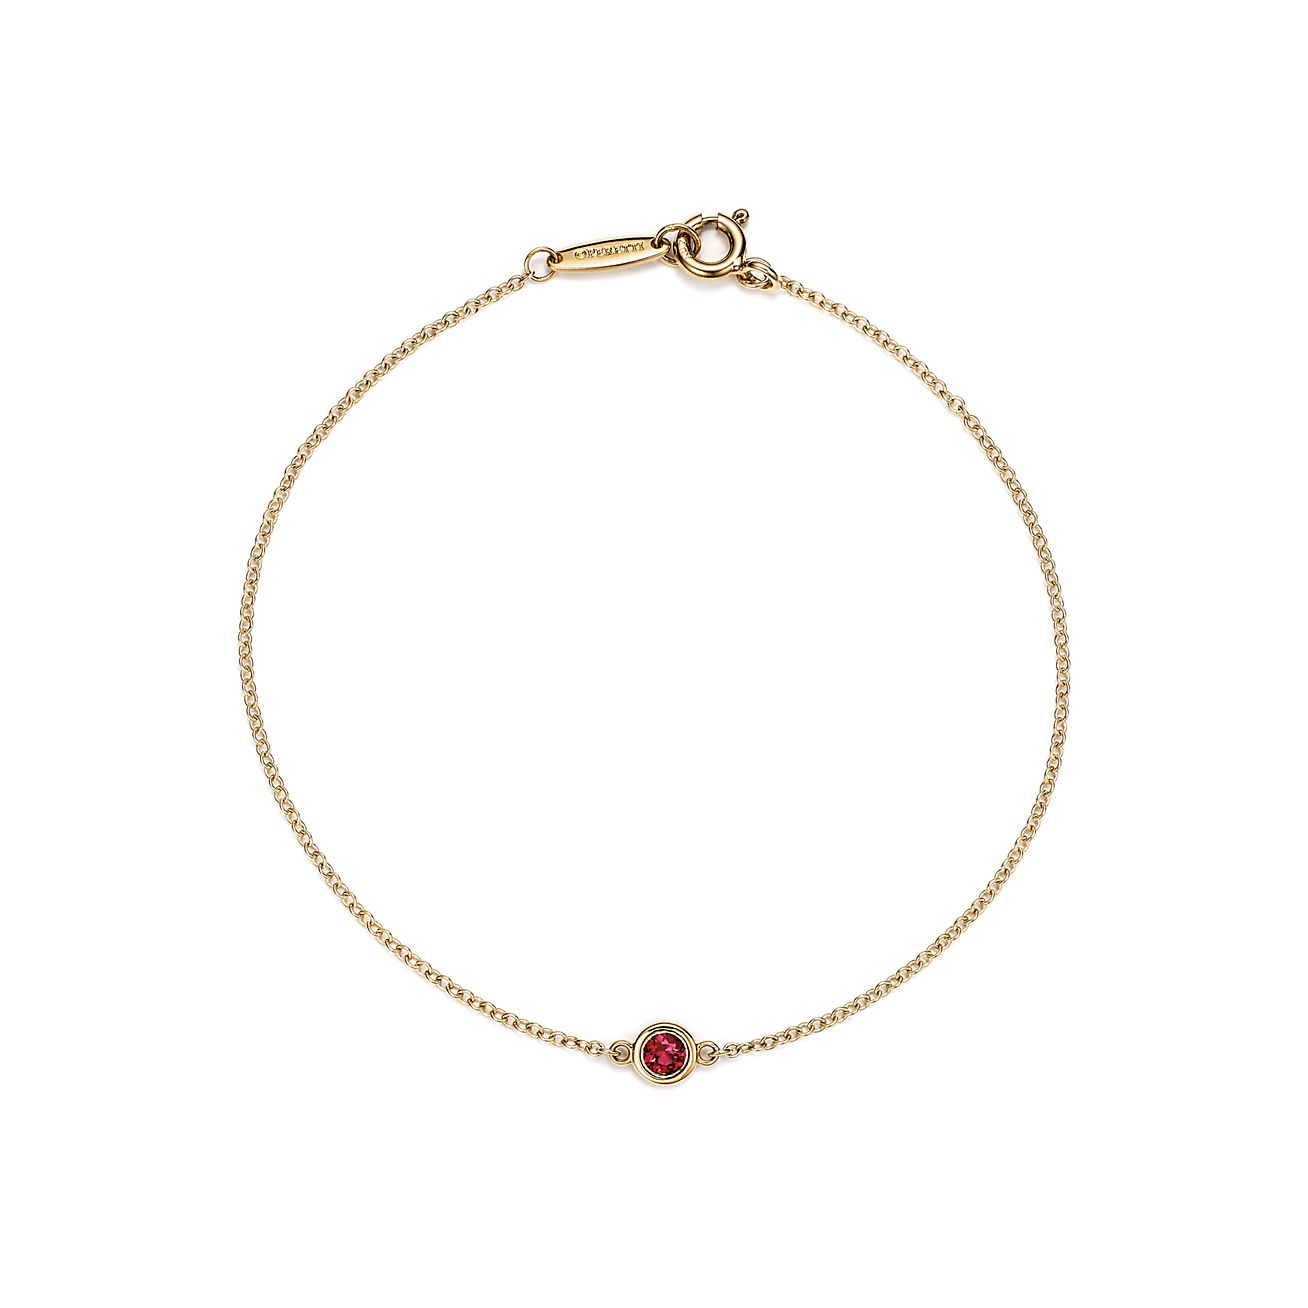 Elsa Peretti®Color by the Yard Bracelet
in Yellow Gold with a Ruby